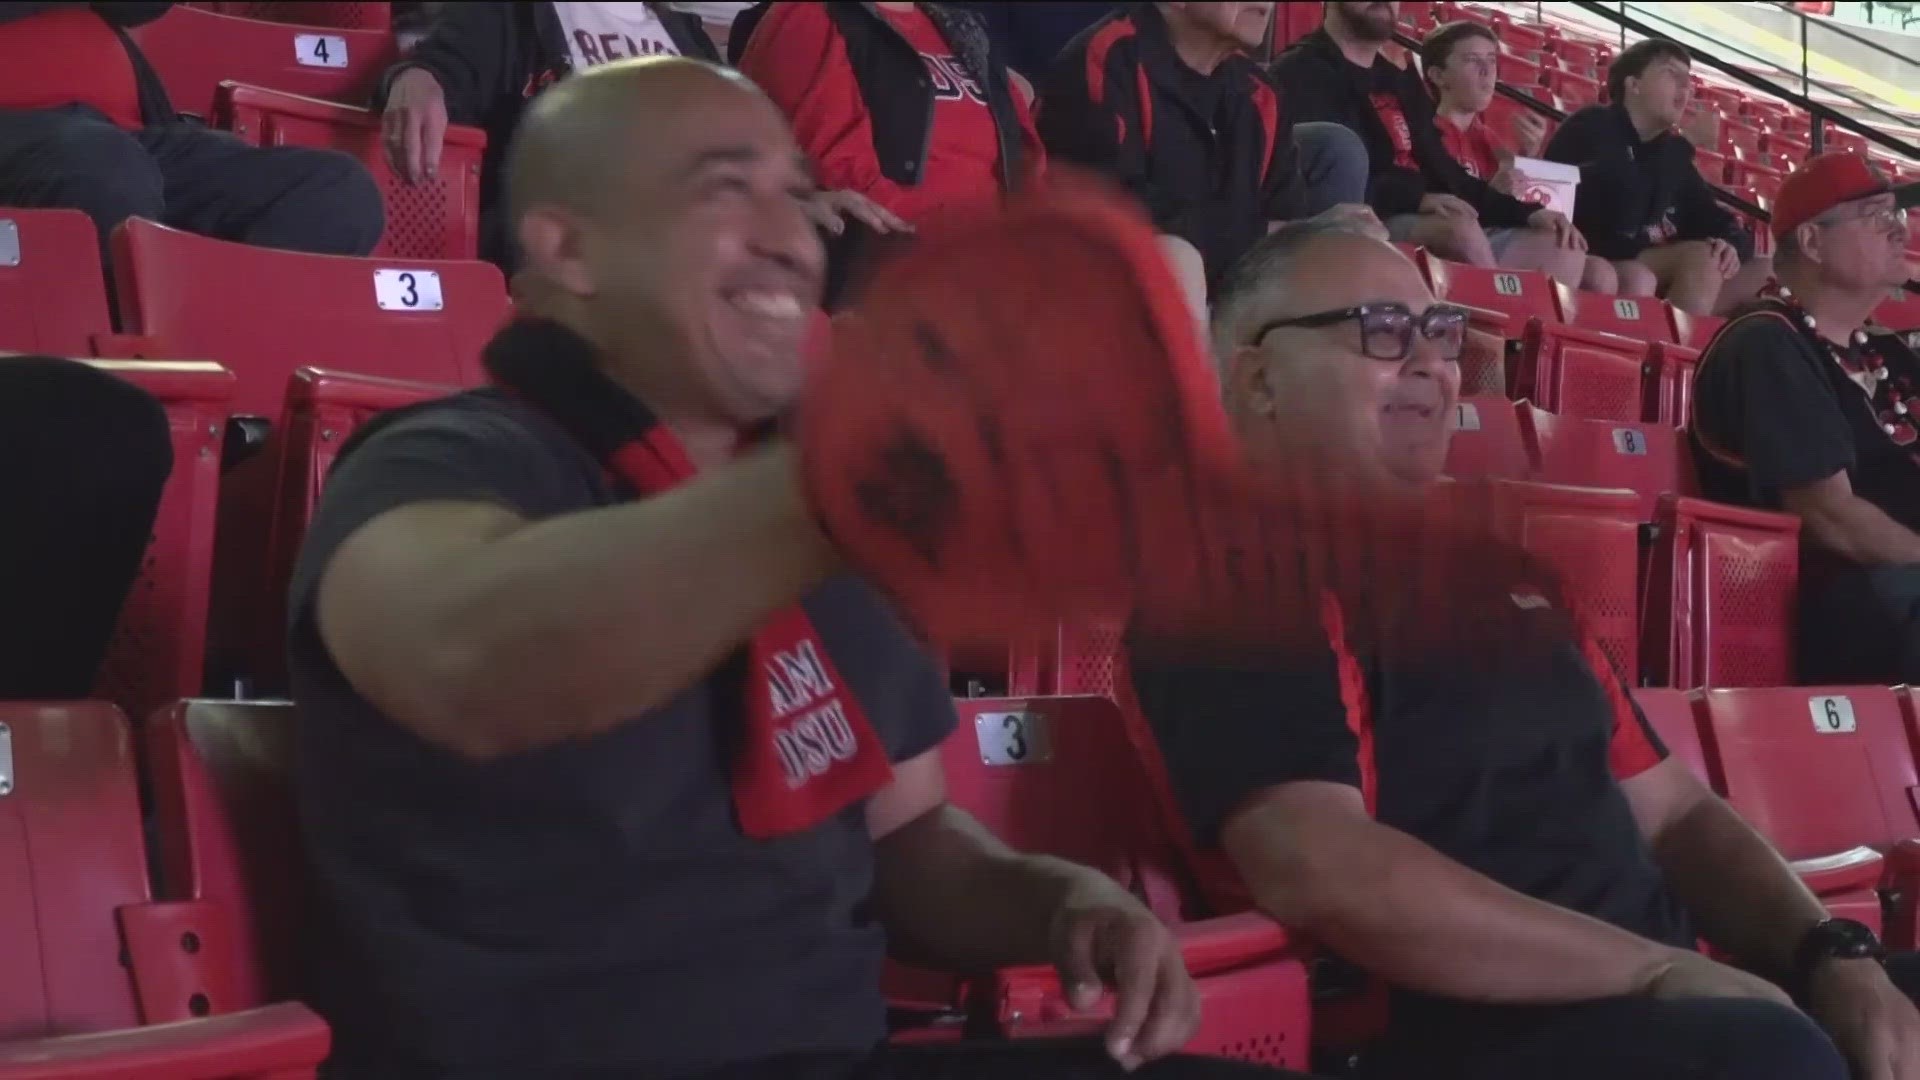 Fans are excited the Aztecs are in the Sweeet 16, something that hasn’t happened since 2014.